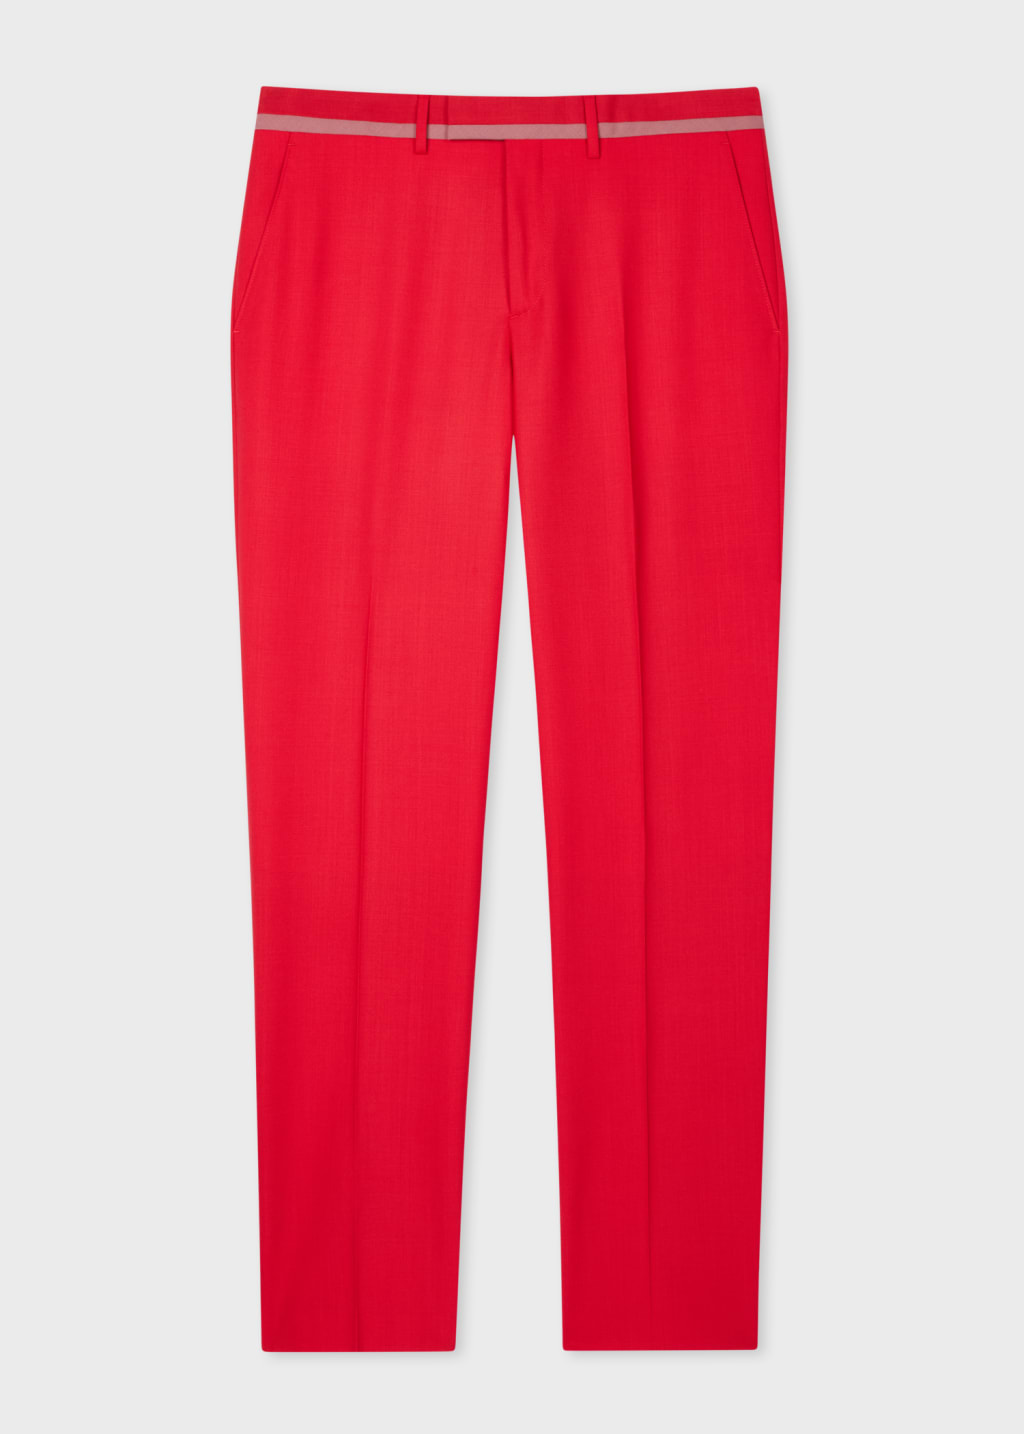 Front View - Red Fresco Wool Trousers Paul Smith